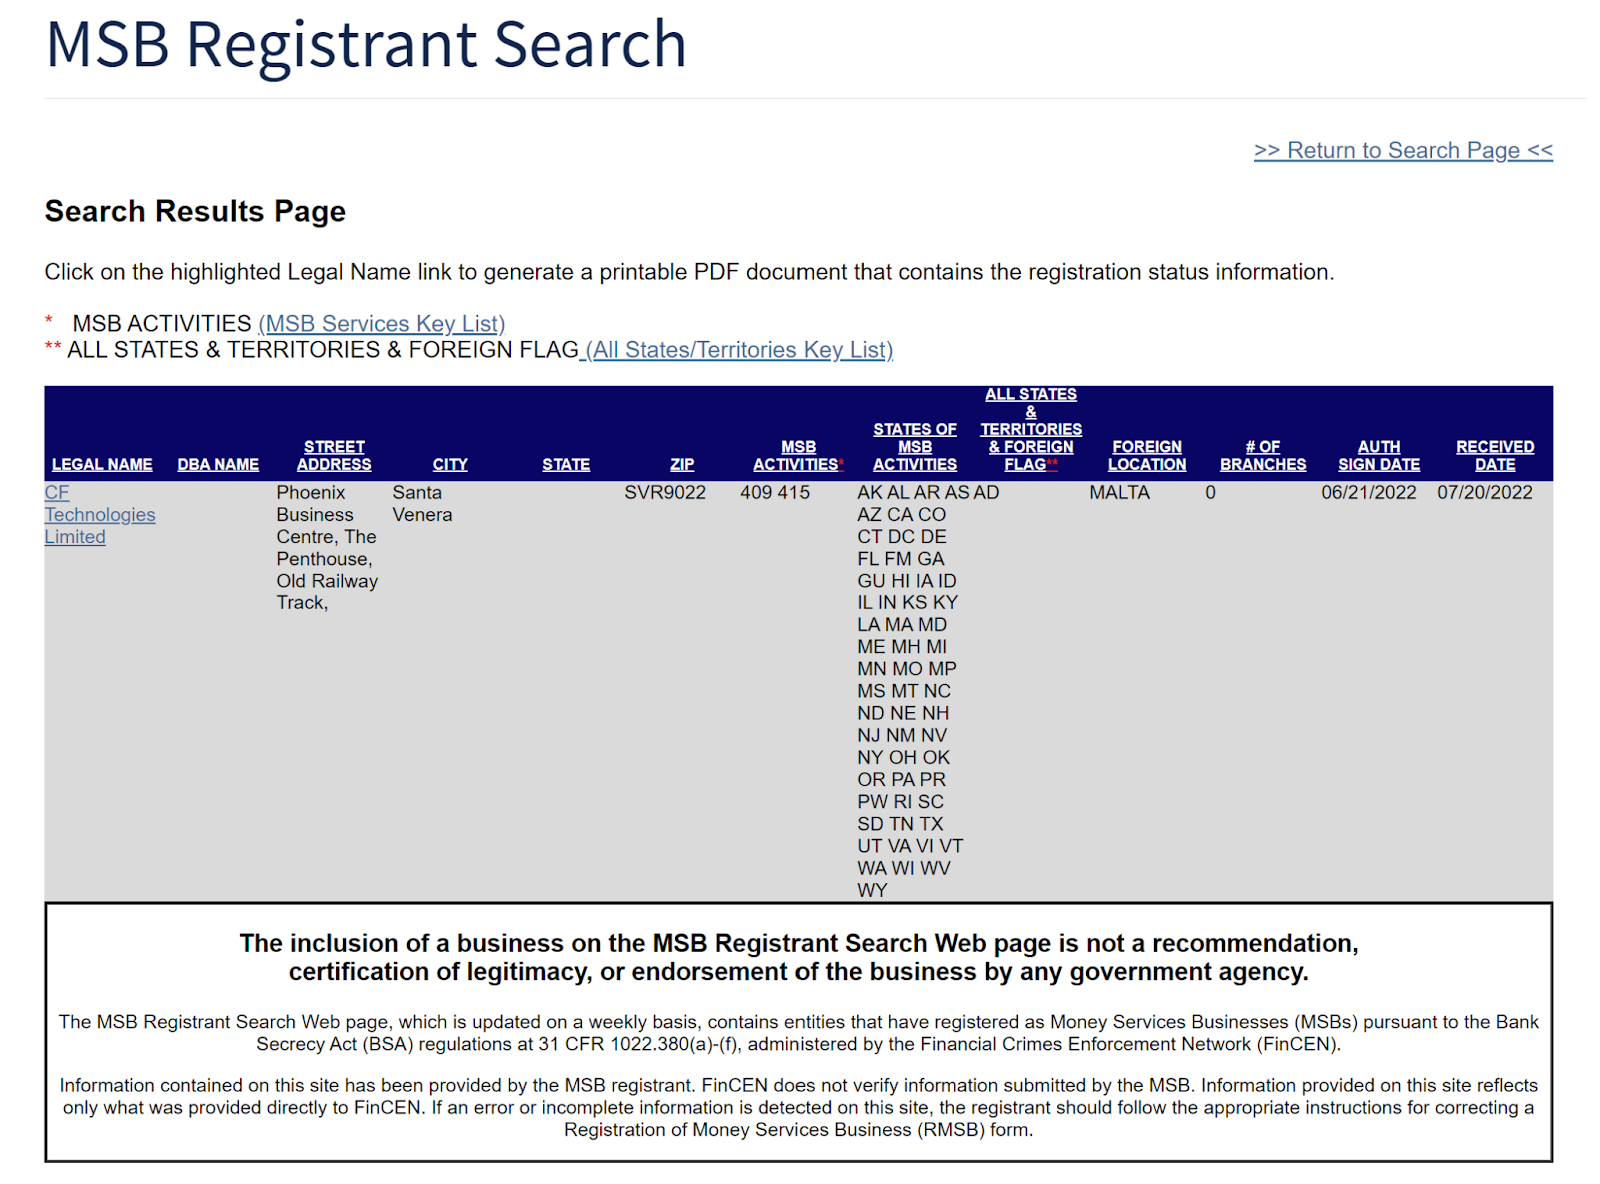 Screenshot of Xcoins listing on the FinCen MSB Registrant Search Website